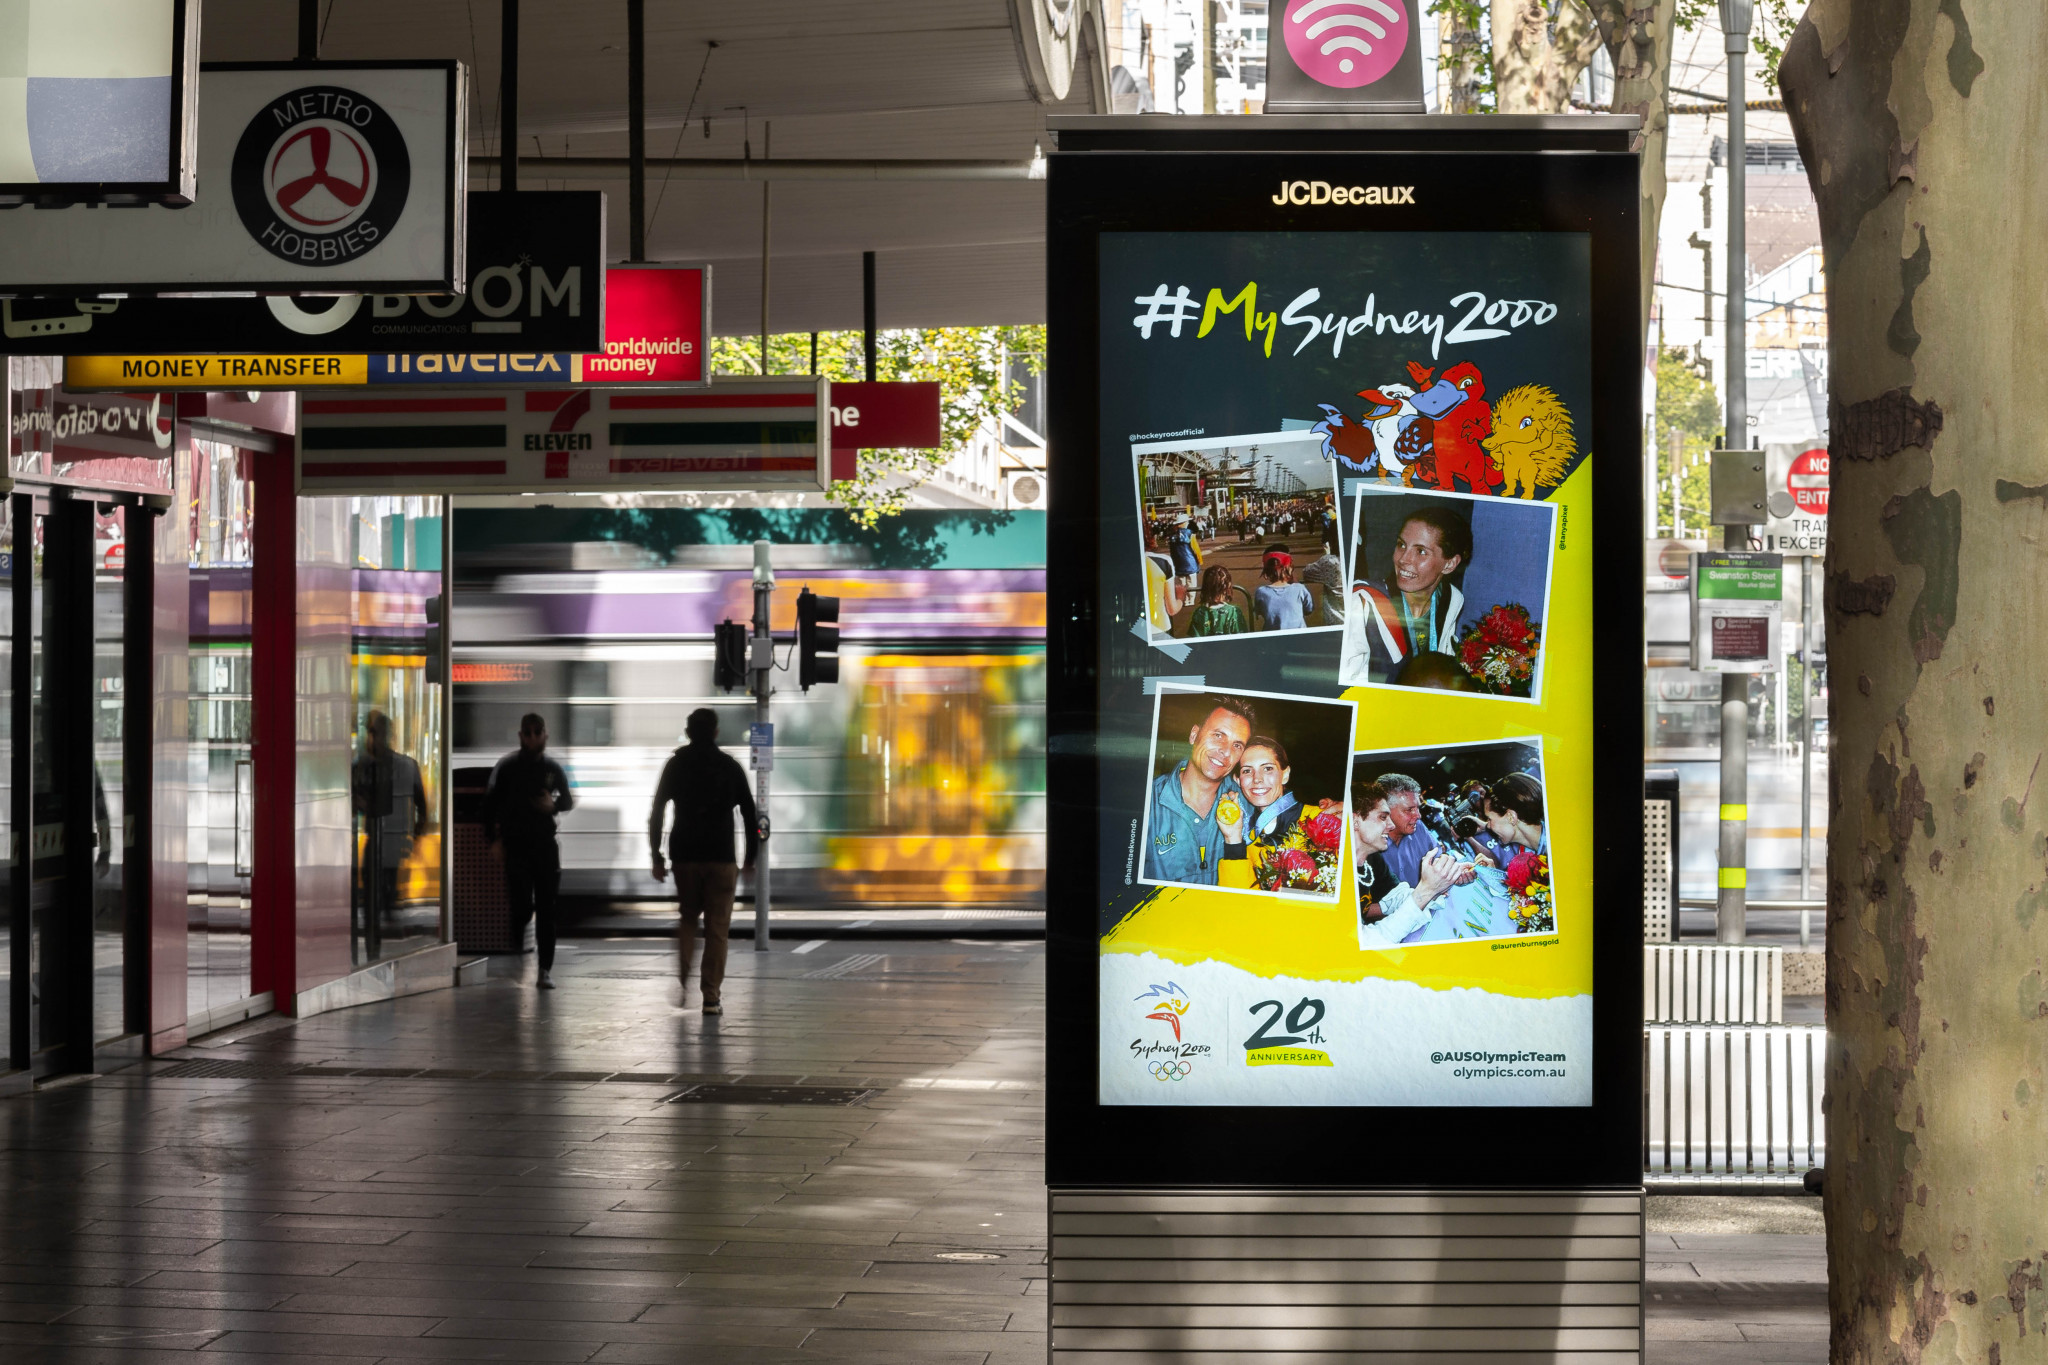 Australian Olympic Committee partners with JCDecaux for Sydney 2000 social campaign